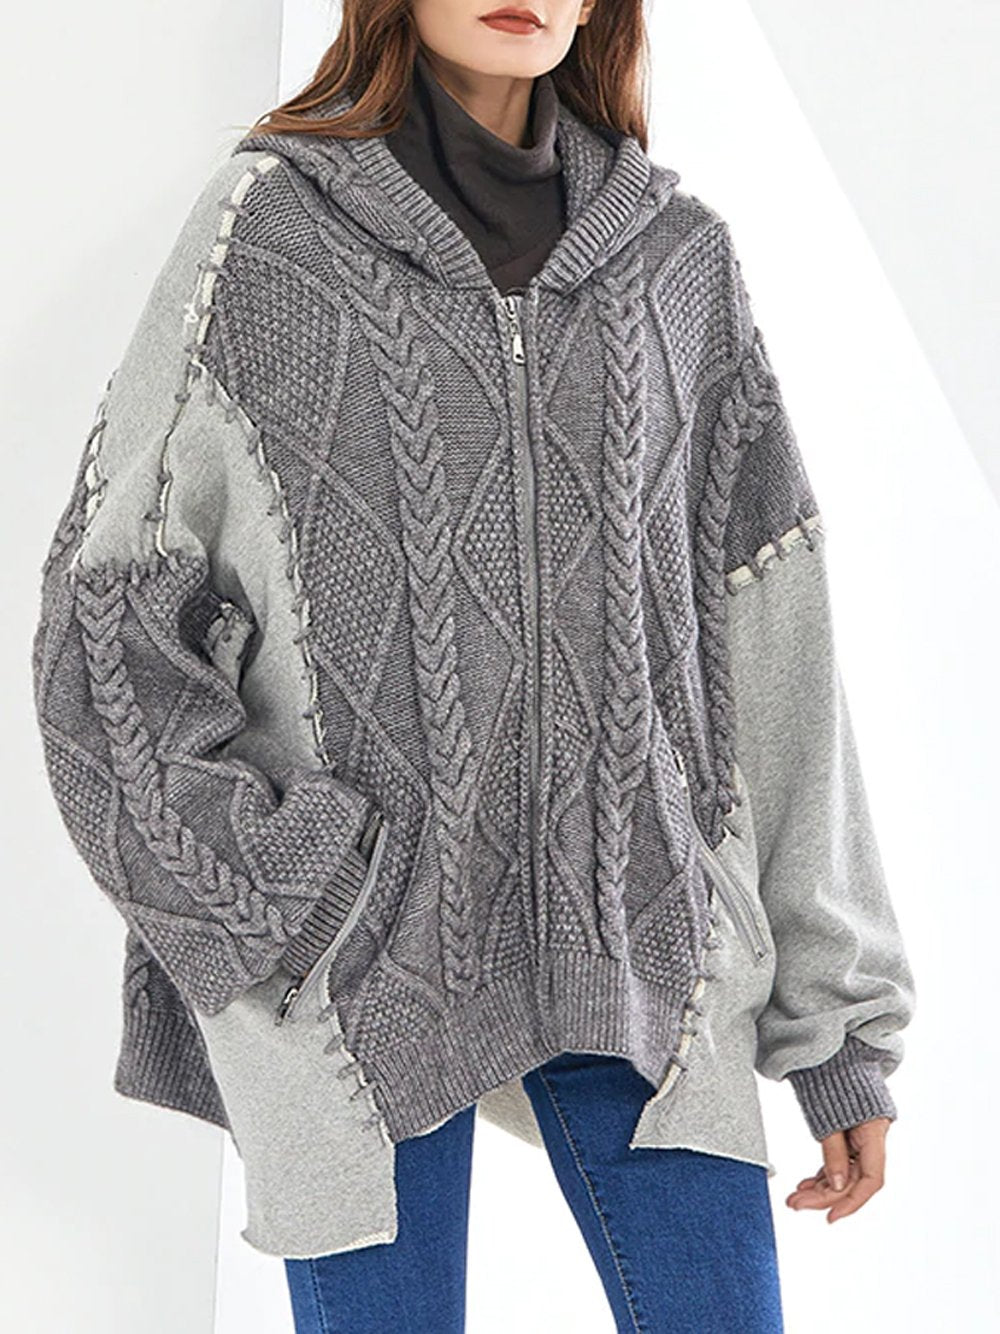 Oversized Cable Knitted Cardigan